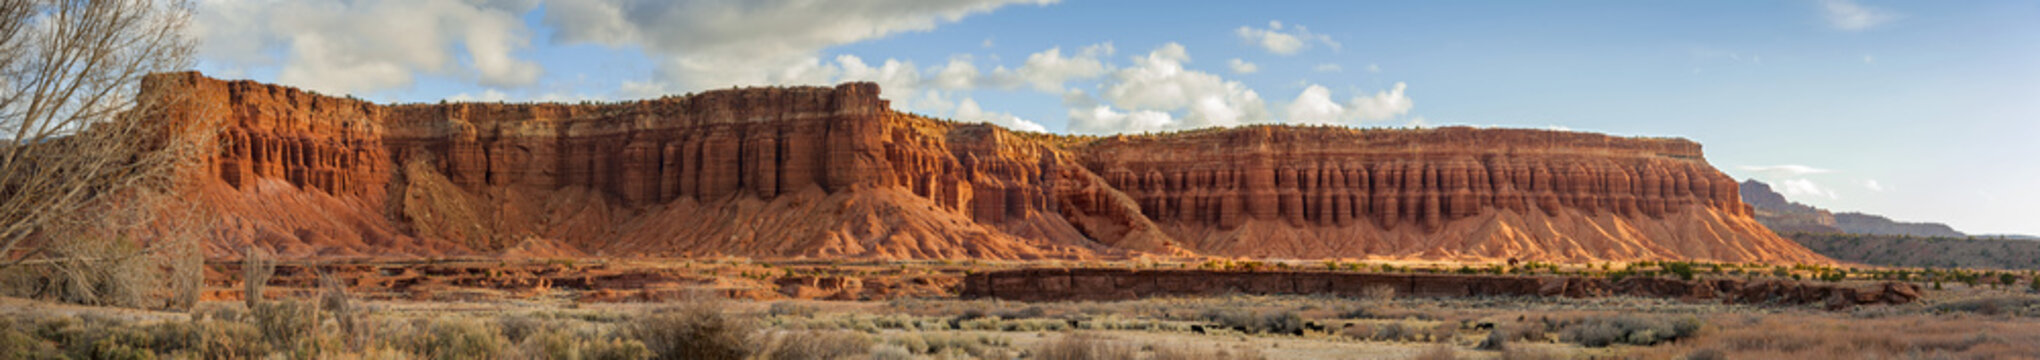 Red Rock Sandstone Formations in Torrey, Utah. Capitol Reef National Park is primarily made up of sandstone formations within the Waterpocket Fold, monocline that extends nearly 100 miles.